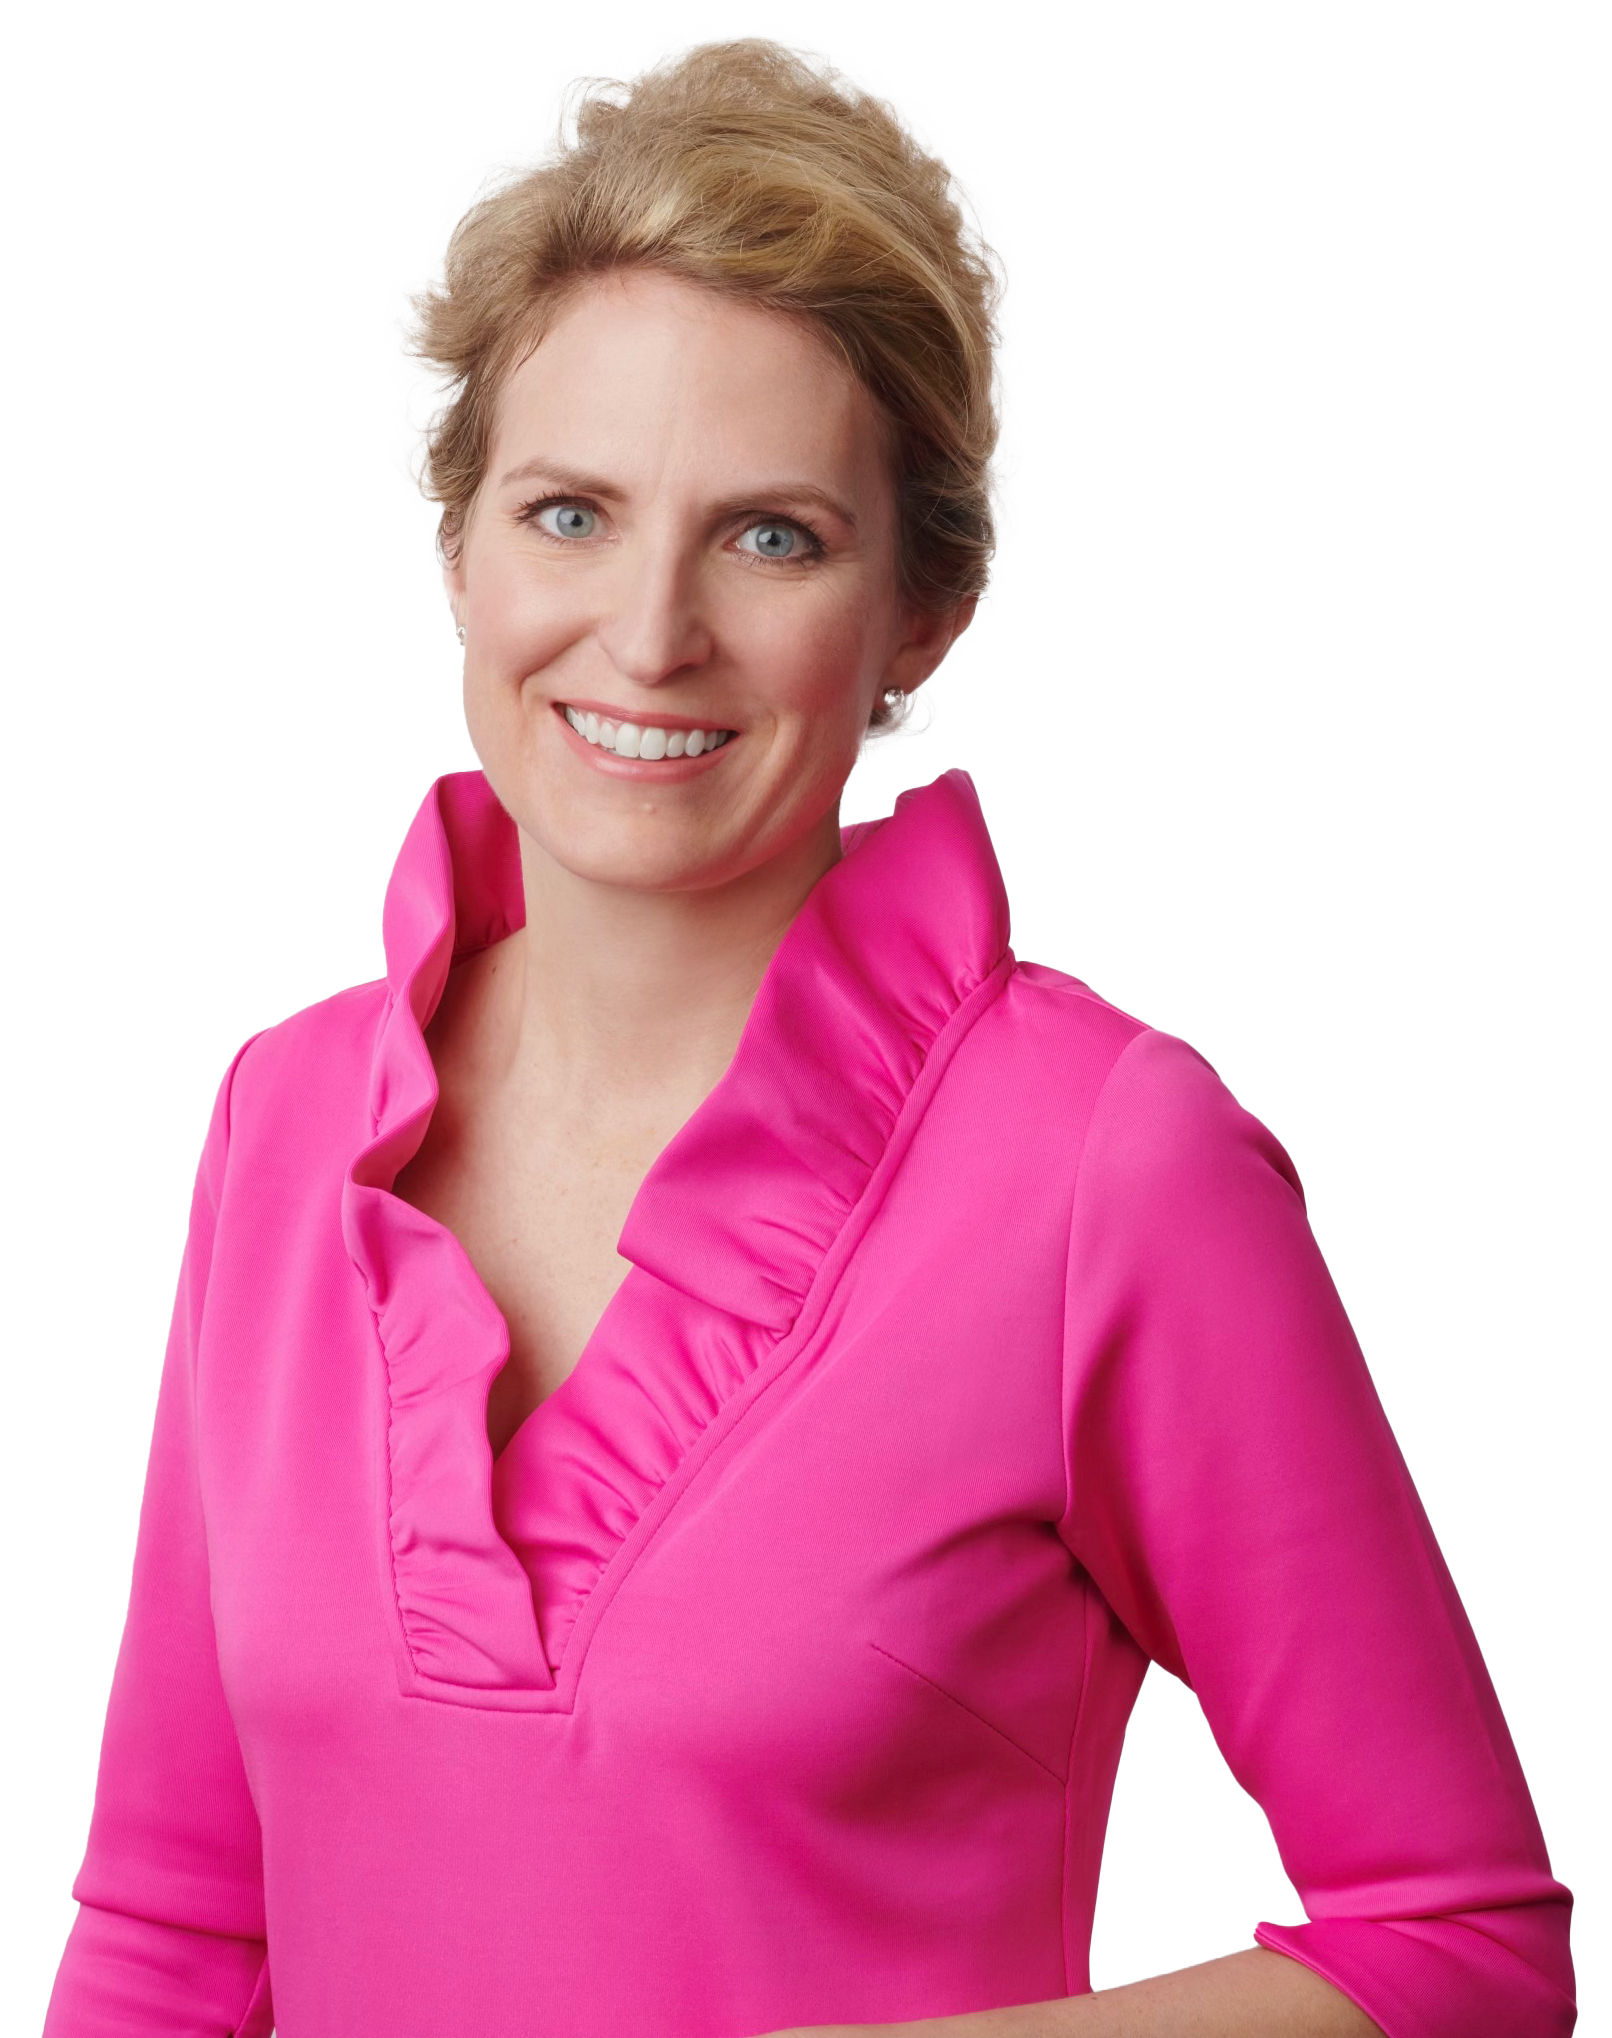 A photo of Dr. Megan Ratliff smiling in a pink dress, with blonde curly hair pinned up on a transparent background, overlaps the header.